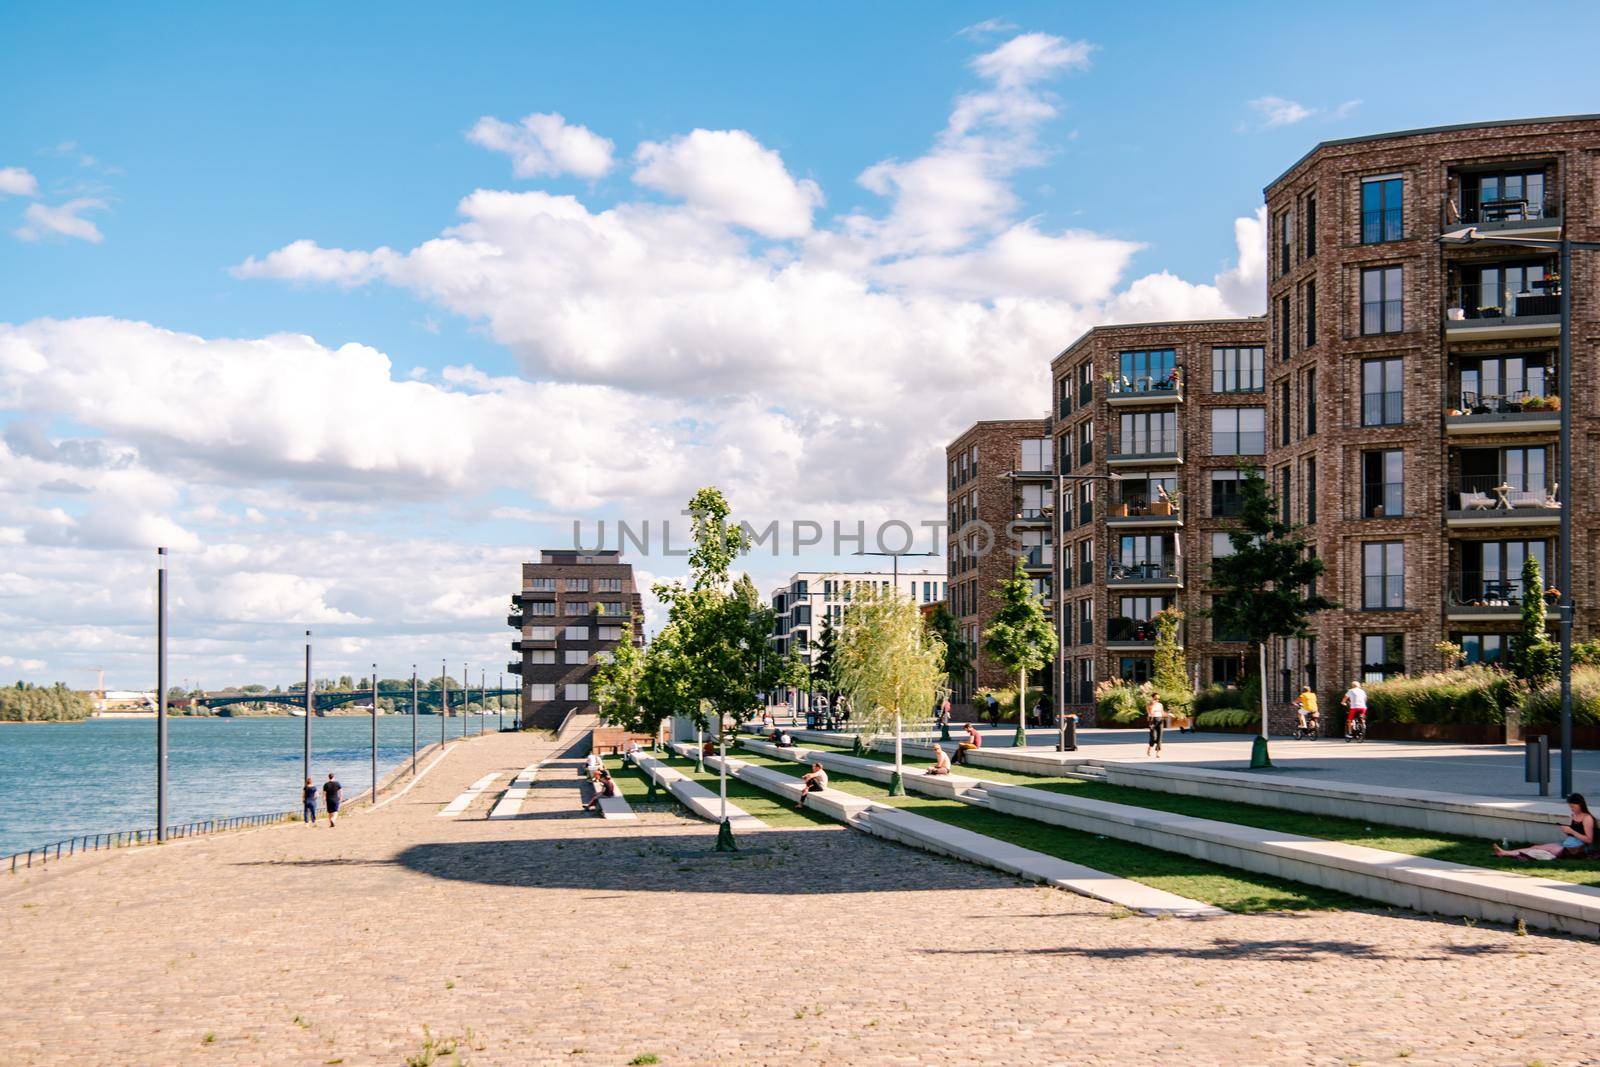 Mainz, Rheinland-PfalzGermany August 2020 , New just built structures apartment condo at port on river Rhein in Mainz by the rhine river by fokkebok